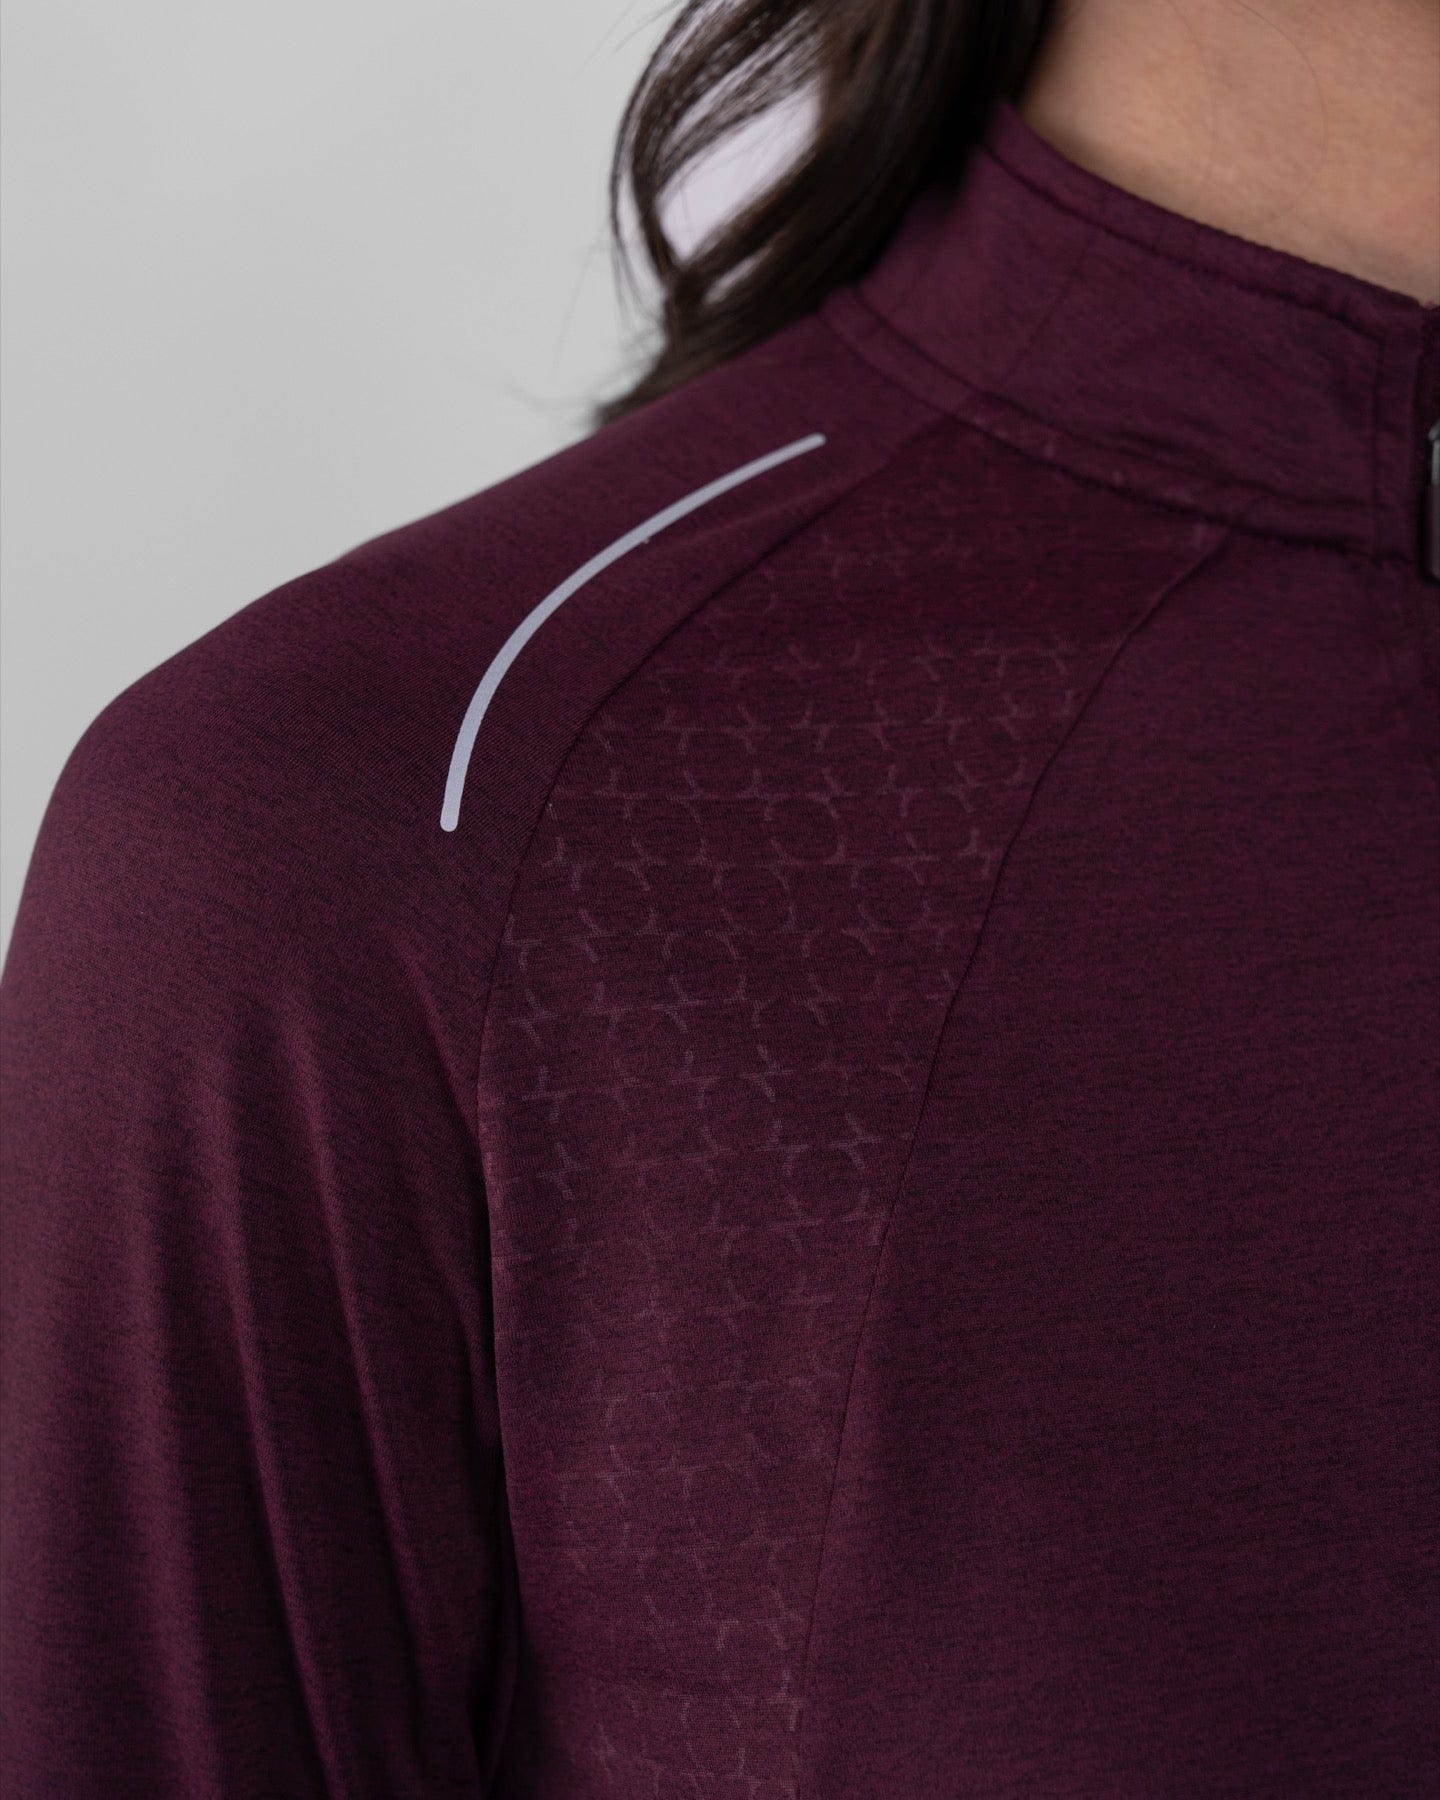 Close-up of the shoulder detail on a high neck long sleeve shirt ARMA by Qynda, featuring a moisture-resistant textured fabric pattern and a curved white reflective stripe.